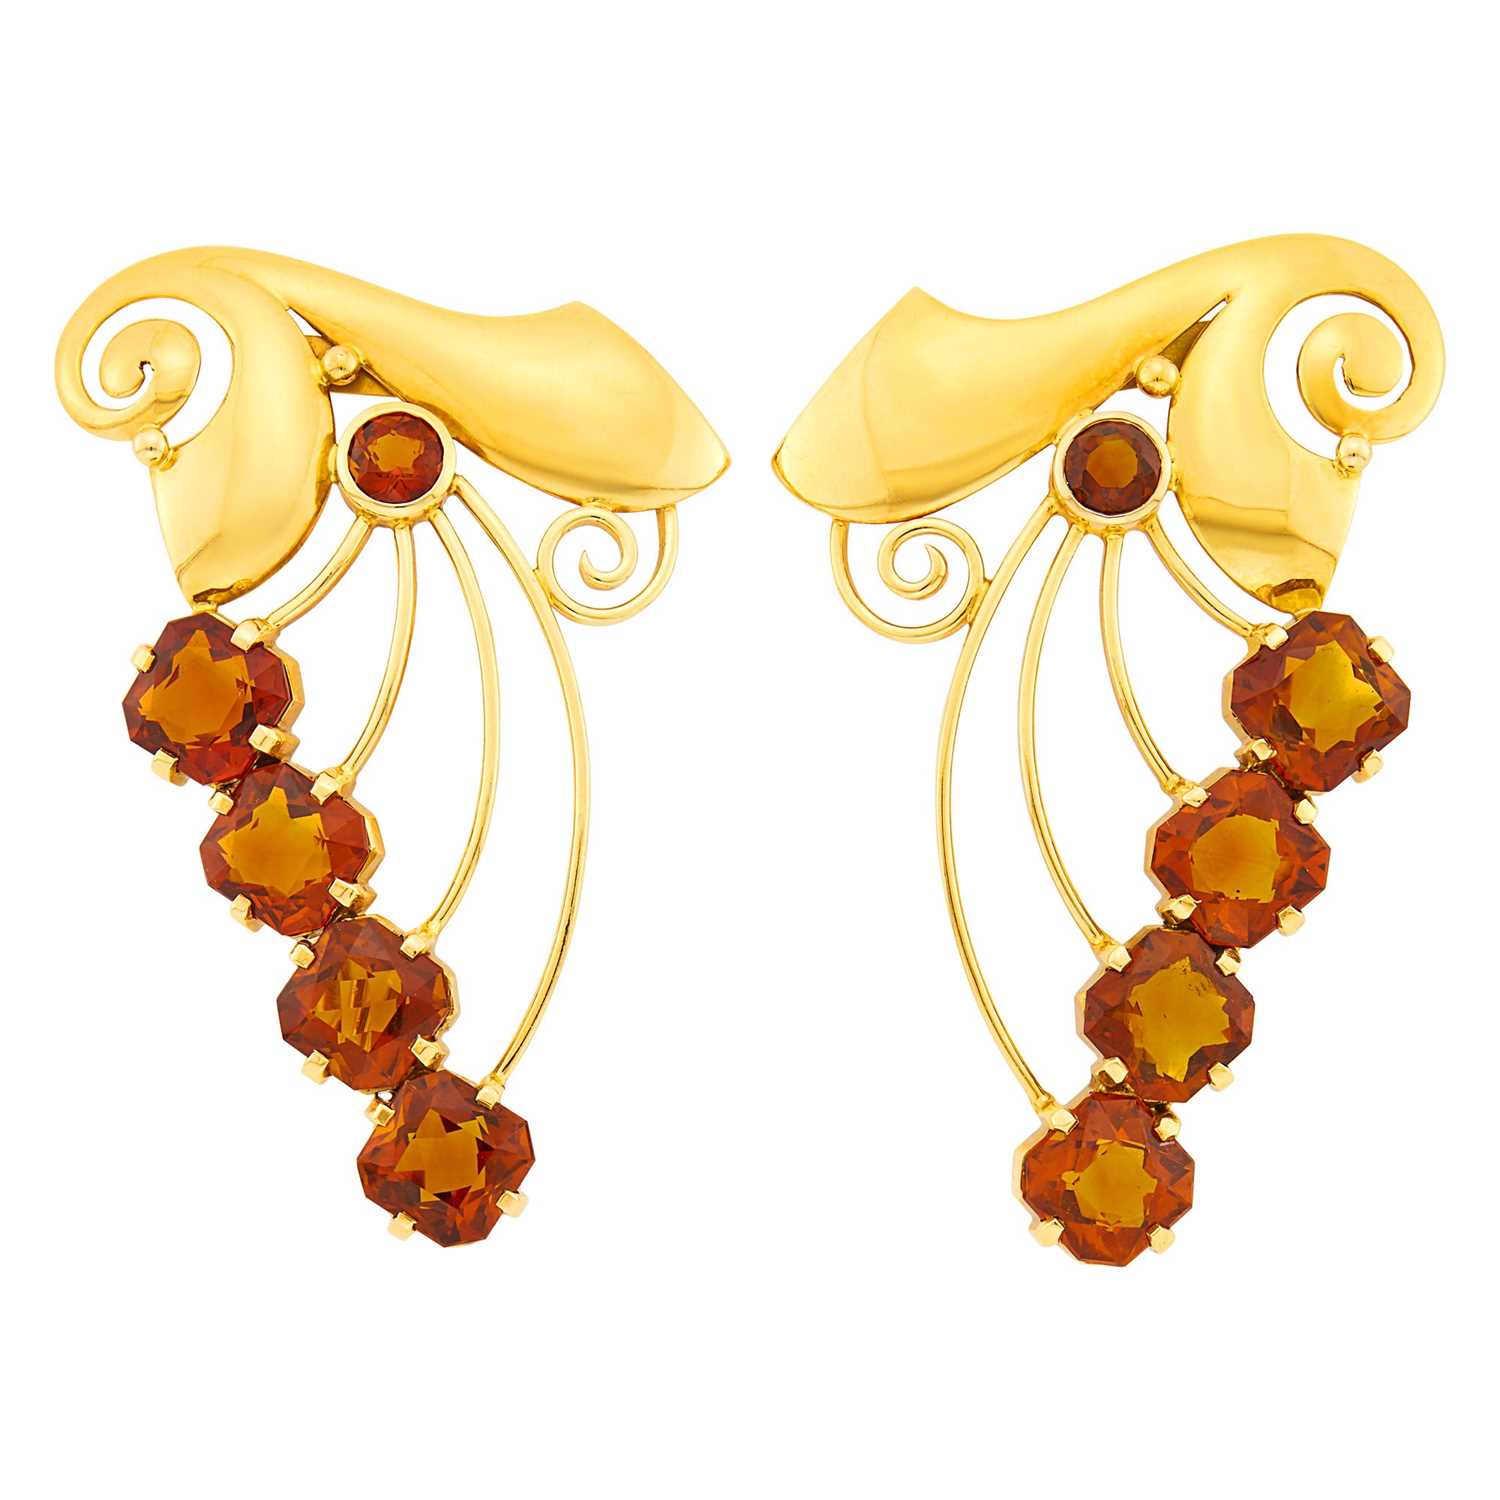 Lot 1101 - Tiffany & Co. Pair of Gold and Citrine Clips